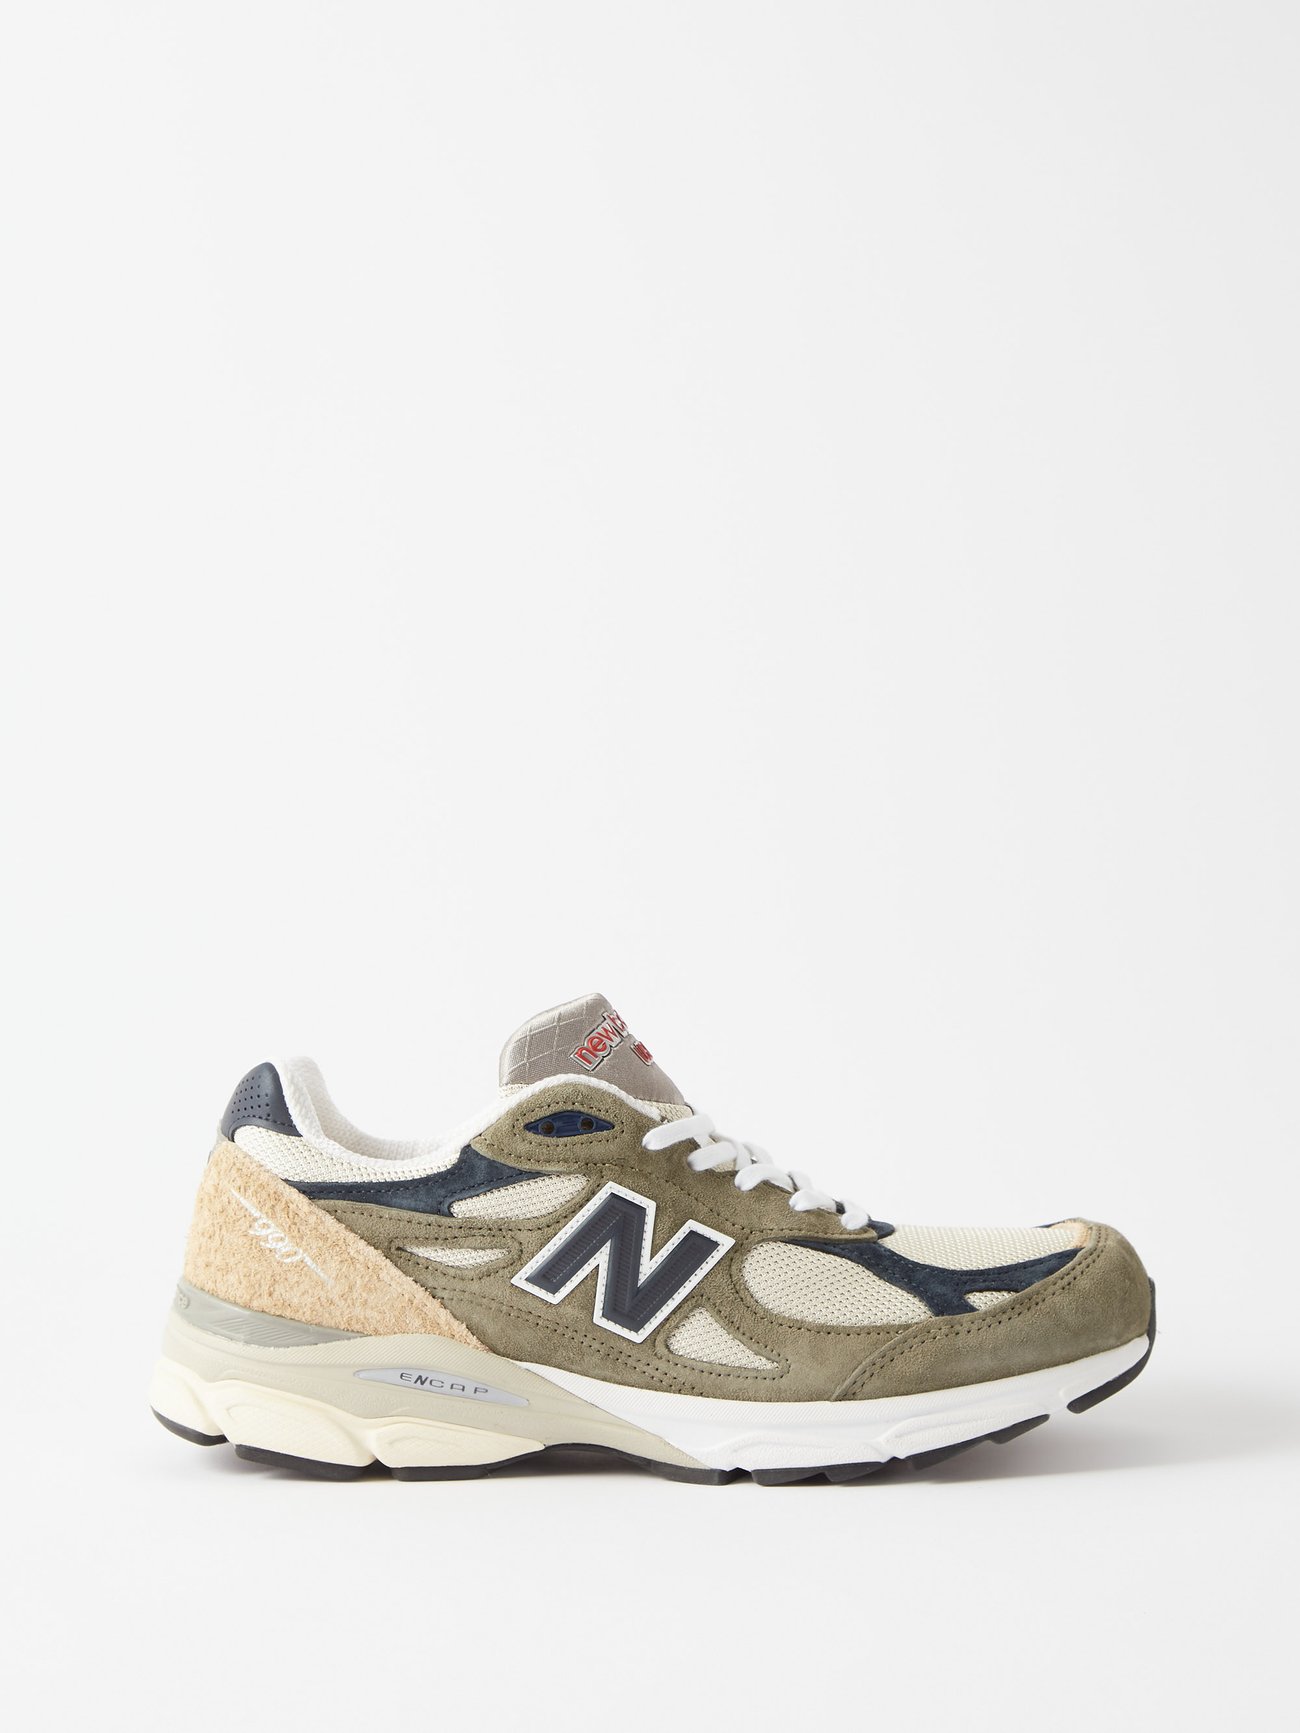 Brown Made in USA 990v3 suede and mesh trainers | New Balance 